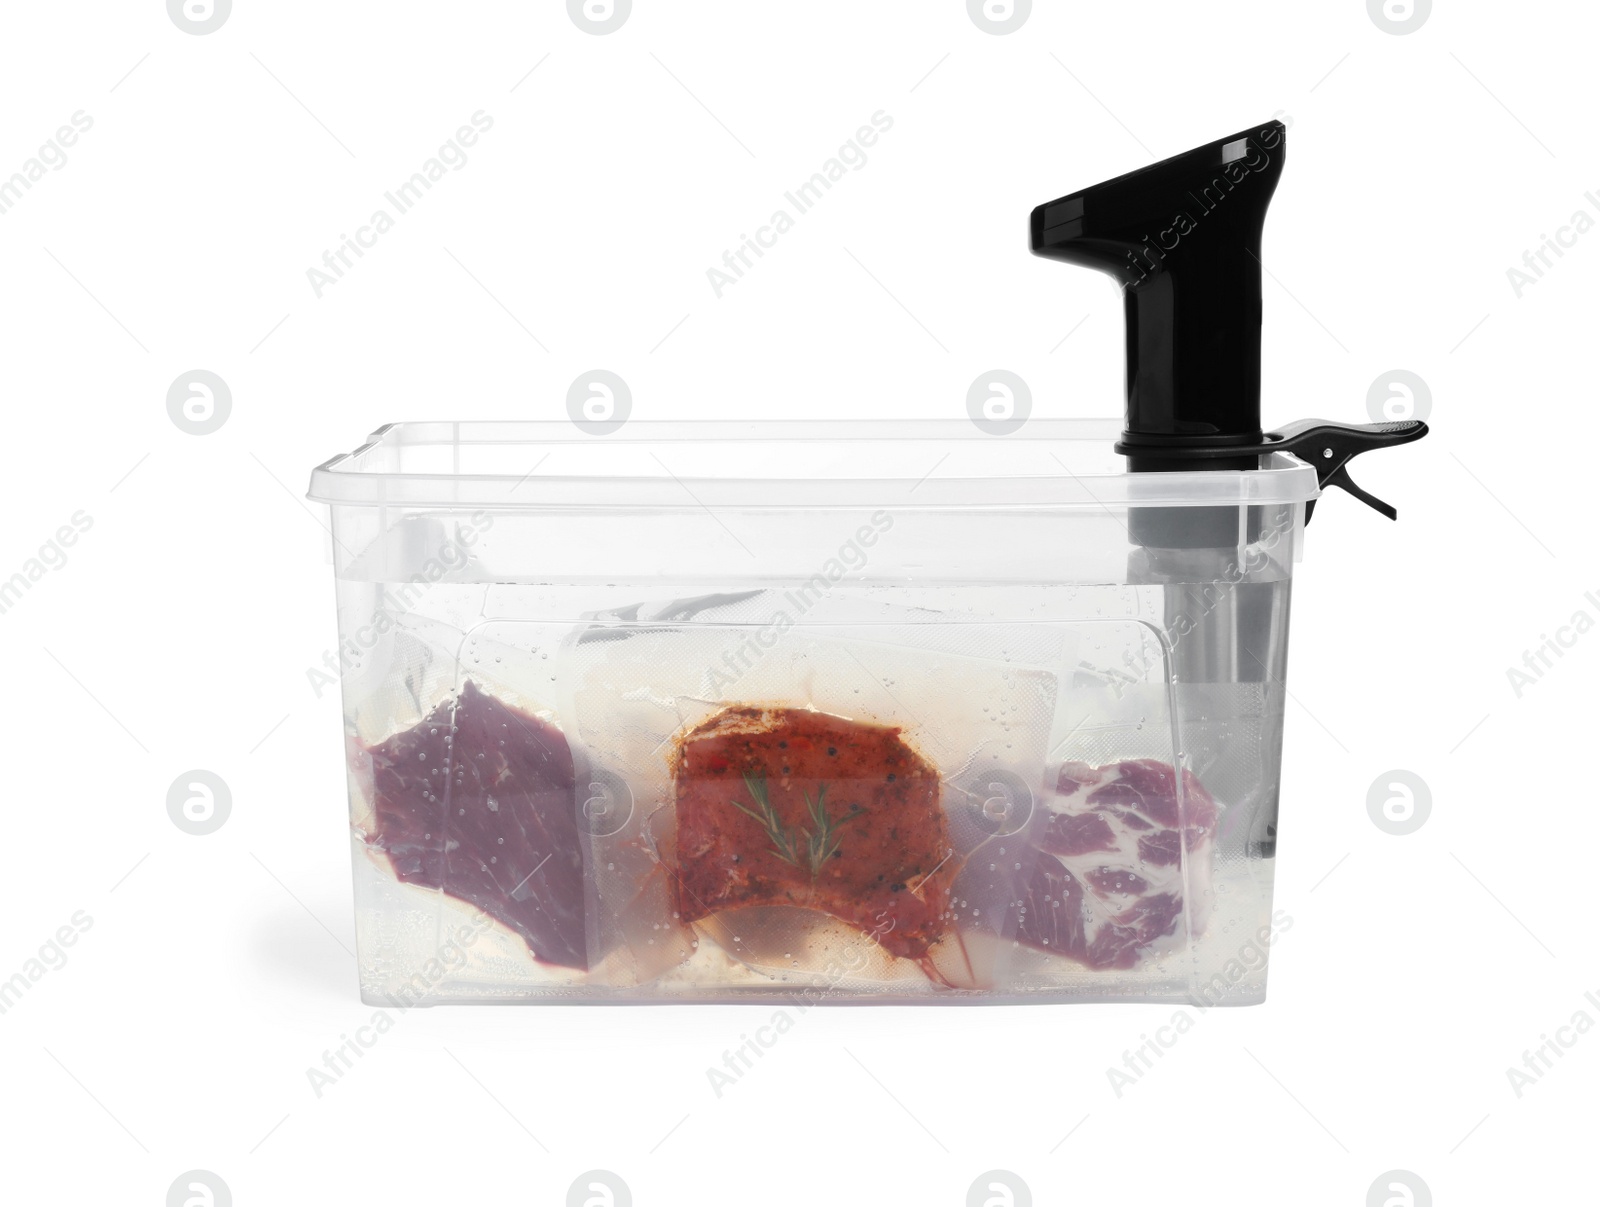 Photo of Thermal immersion circulator and meat in box on white background. Vacuum packing for sous vide cooking